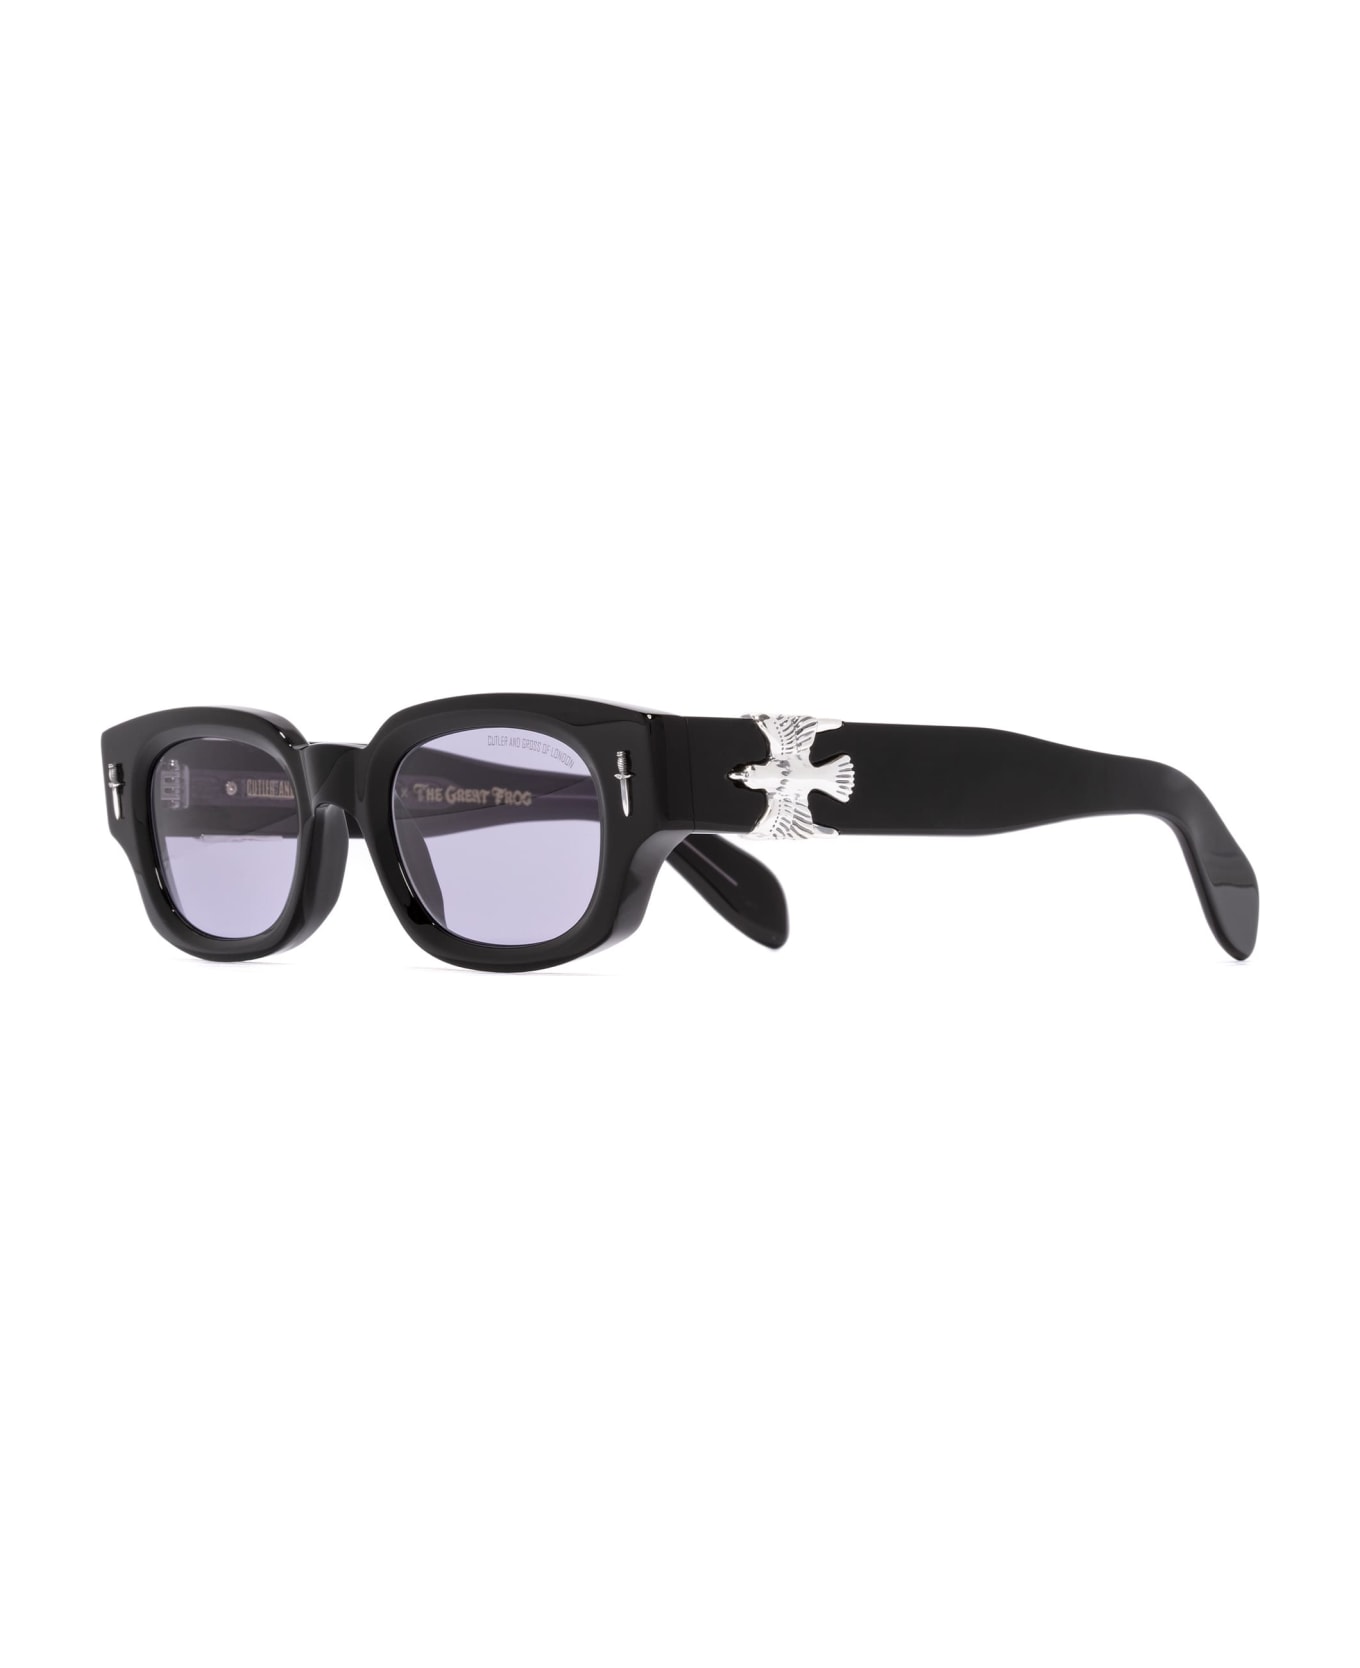 Cutler and Gross The Great Frog - Soaring Eagle / Black Sunglasses - Black サングラス